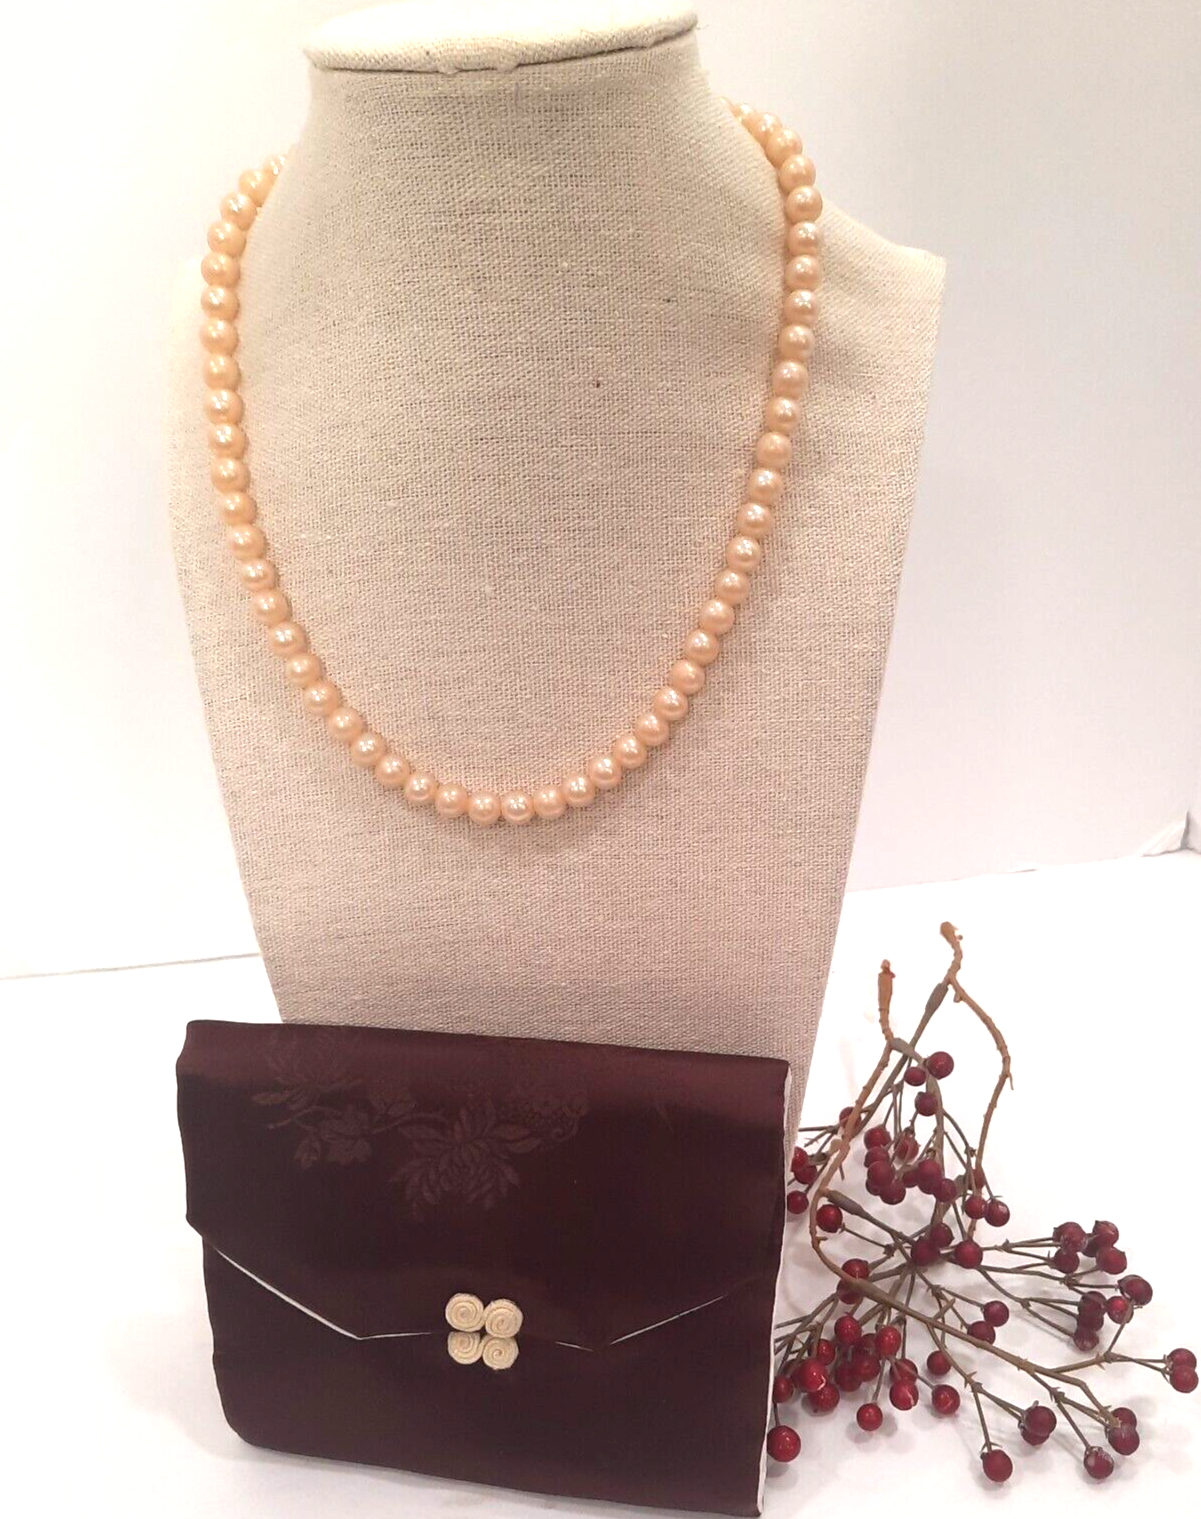 Primary image for Vintage 16" Faux Pearl Necklace - Signed Japan - with Satin bag travel case gift